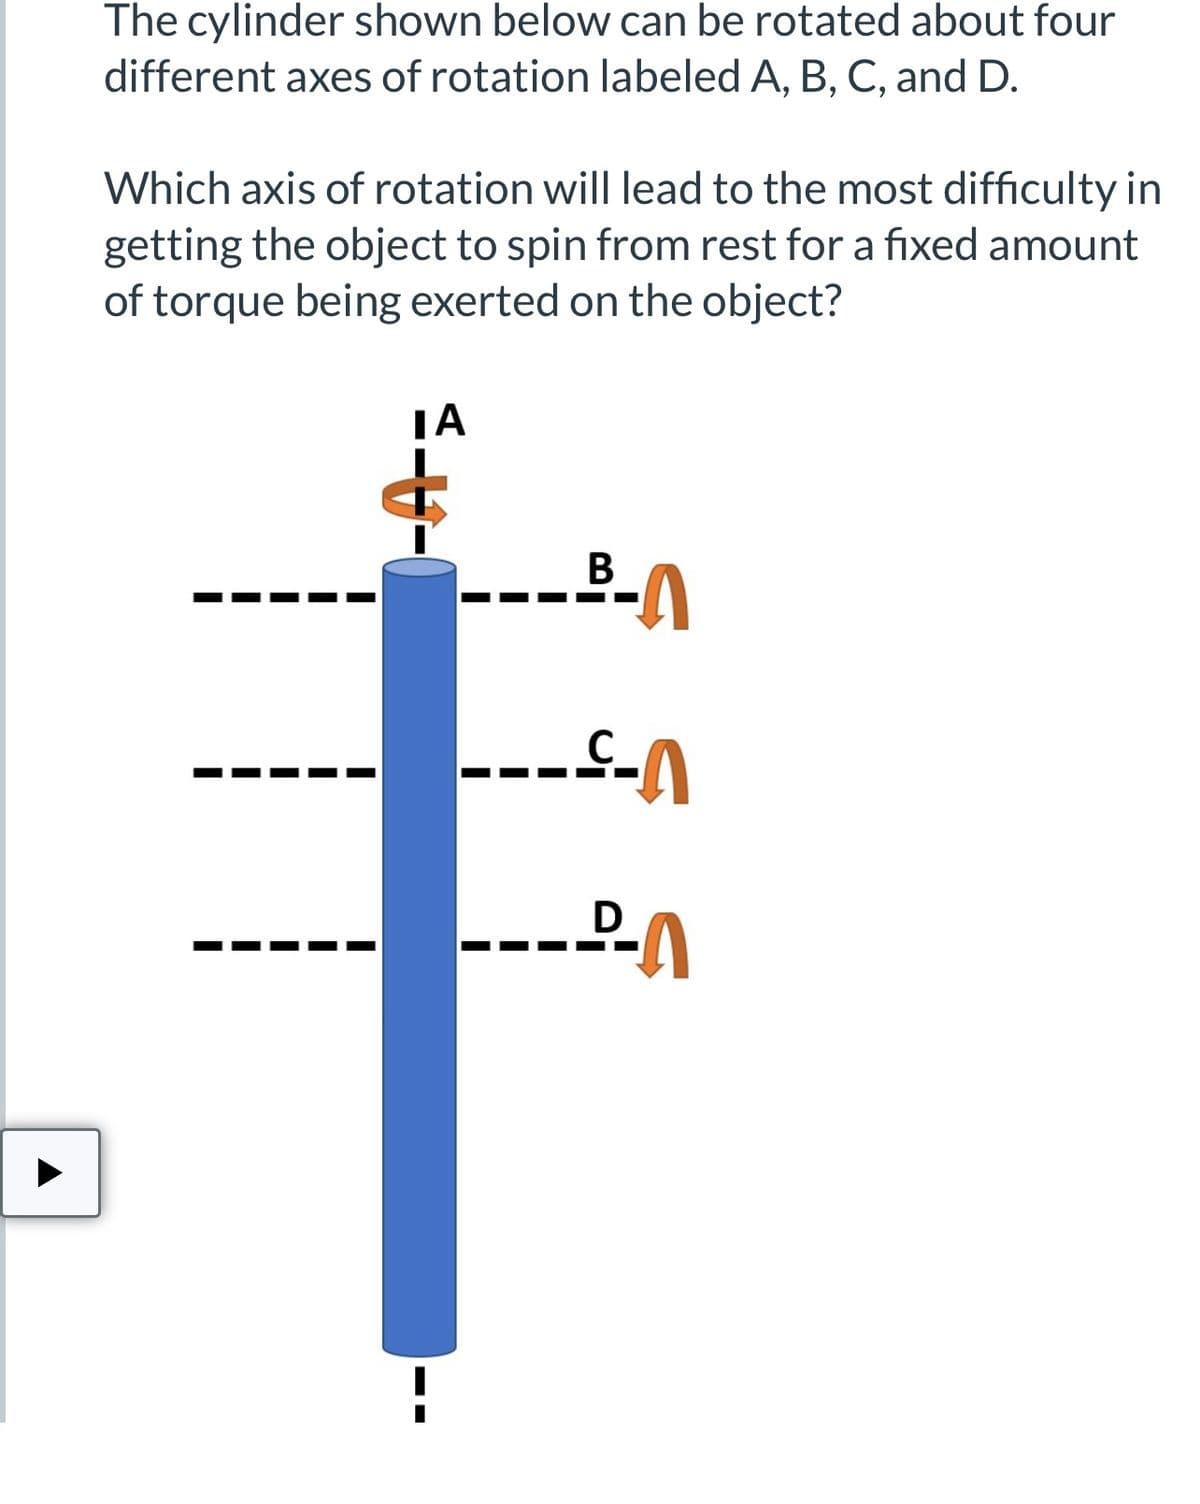 The cylinder shown below can be rotated about four
different axes of rotation labeled A, B, C, and D.
Which axis of rotation will lead to the most difficulty in
getting the object to spin from rest for a fixed amount
of torque being exerted on the object?
-A-=
ΤΑ
--
B-A
----A
---A